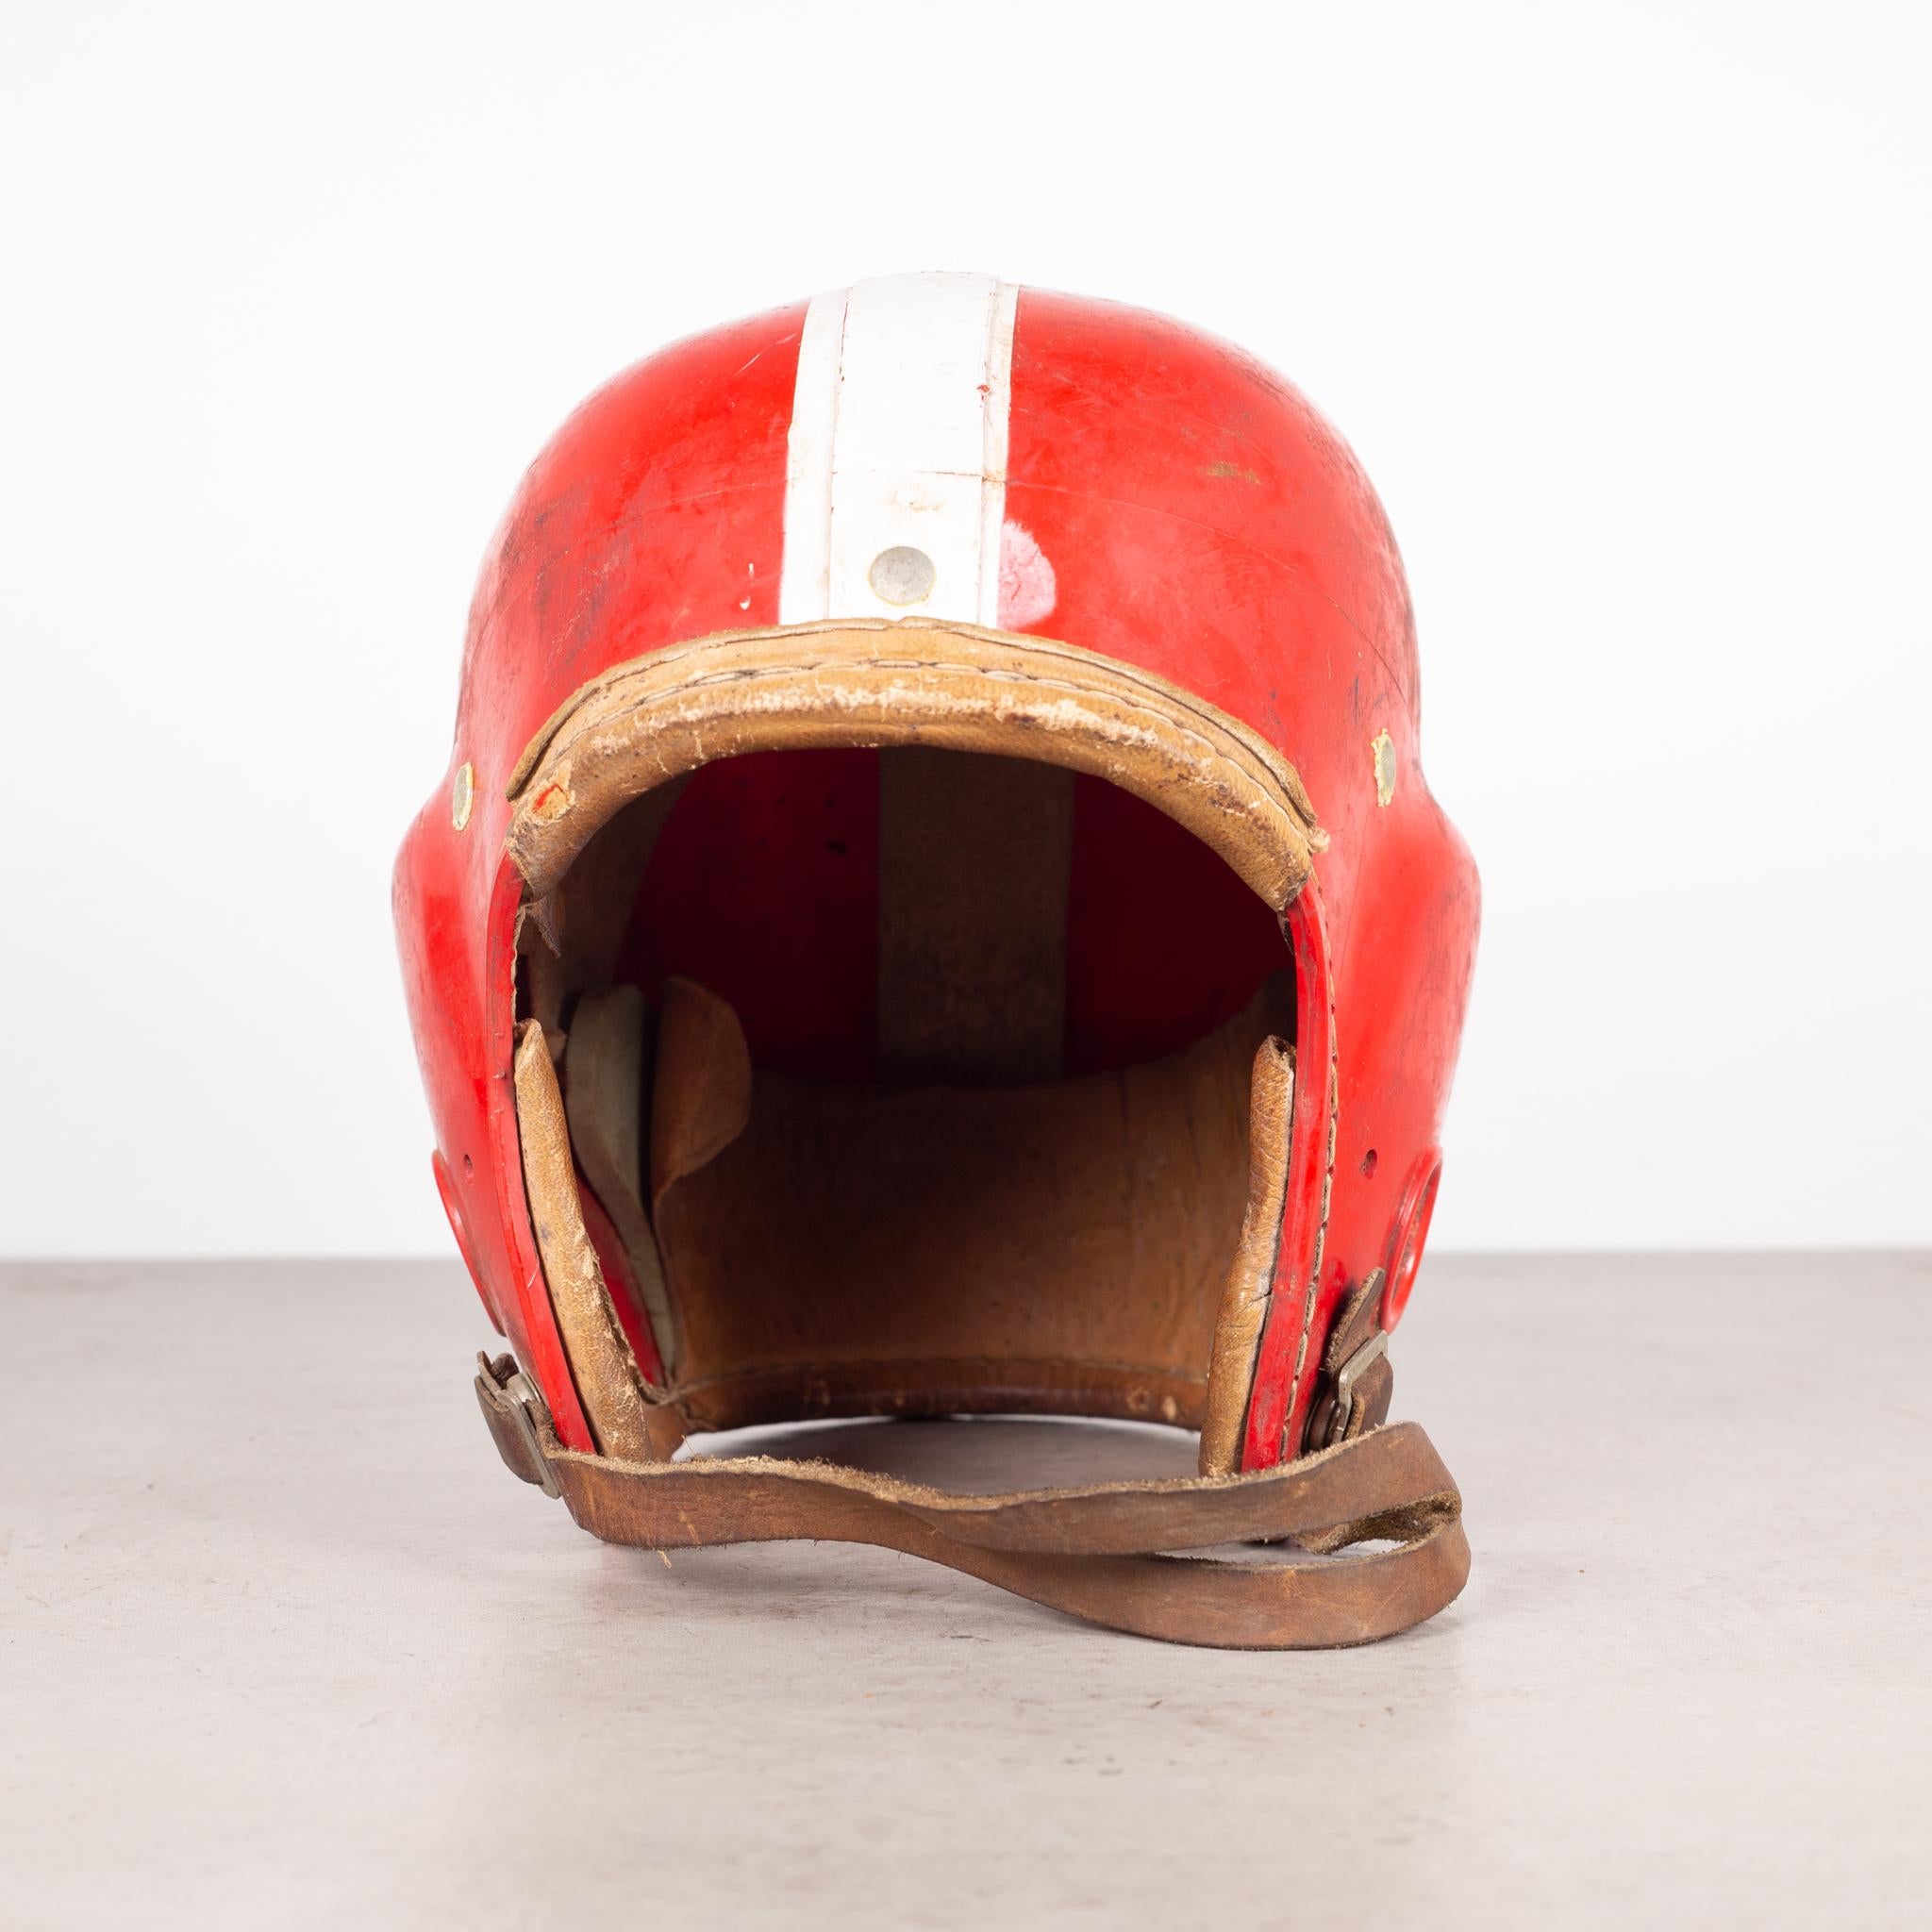 About

An original vintage football helmet with a leather chin strap.

Creator J.C. Higgins.
Date of manufacture c.1960.
Materials and techniques hard plastic, leather.
Condition good. Wear consistent with age and use.
Dimensions H 8 in. W 9